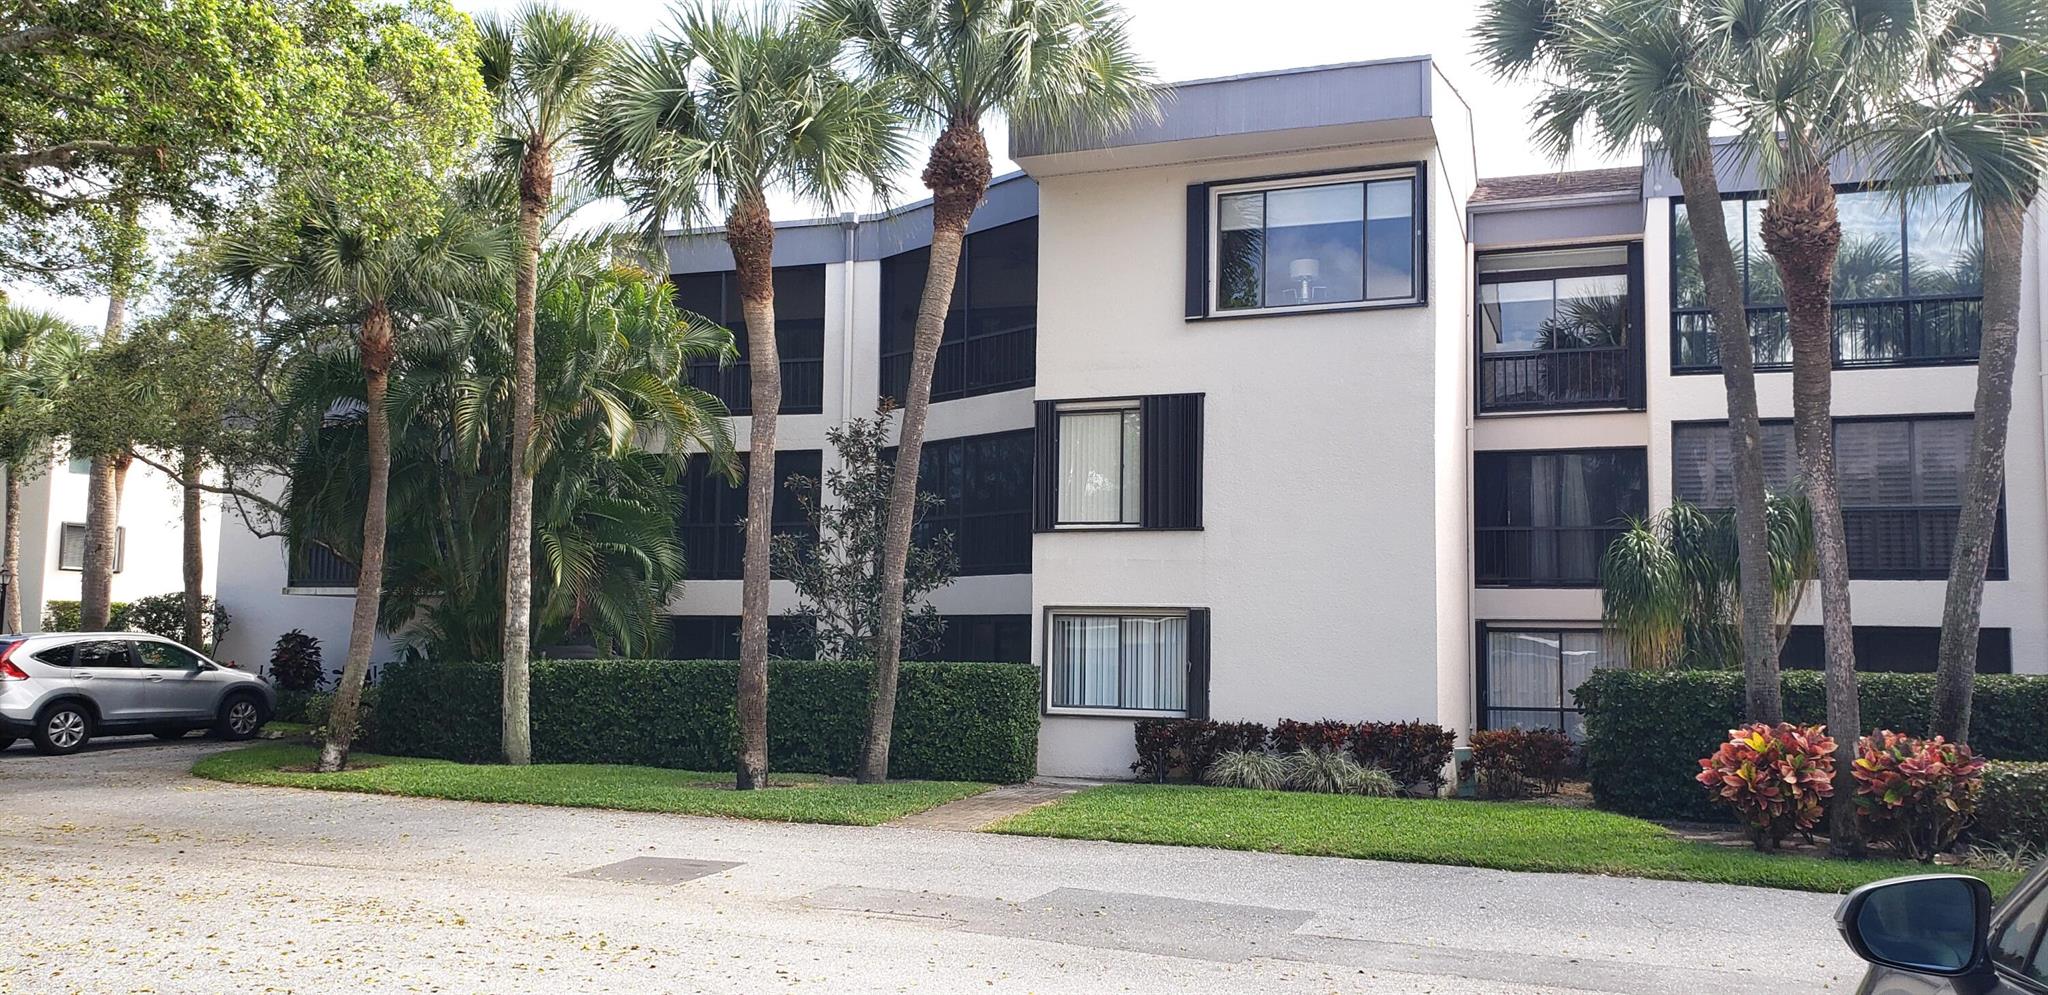 Large and spacious 2/2 condo with boat slips and intracoastal views on premises. Newly renovated kitchen and 2 separate balconies. Updated bathrooms. Brand new water heater and a/c 2014. Hurricane shutters, and full-size washer/dryer. Lots of storage space. NOT a waterfront condo. Boat slips have a waiting list. A walk away from your front door. Must reside in the community to purchase or rent boat slip. 24-hour guard gate, close to great restaurants and premier shopping. Beaches 1 mile away. Owner can rent immediately if so desired. Tennis court, and 2 pools. There is a storage unit deeded with the condo. Waterfront on opposite side of the building. Seller will pay for 1 year HOME WARRANTY from American Home Shield!!!